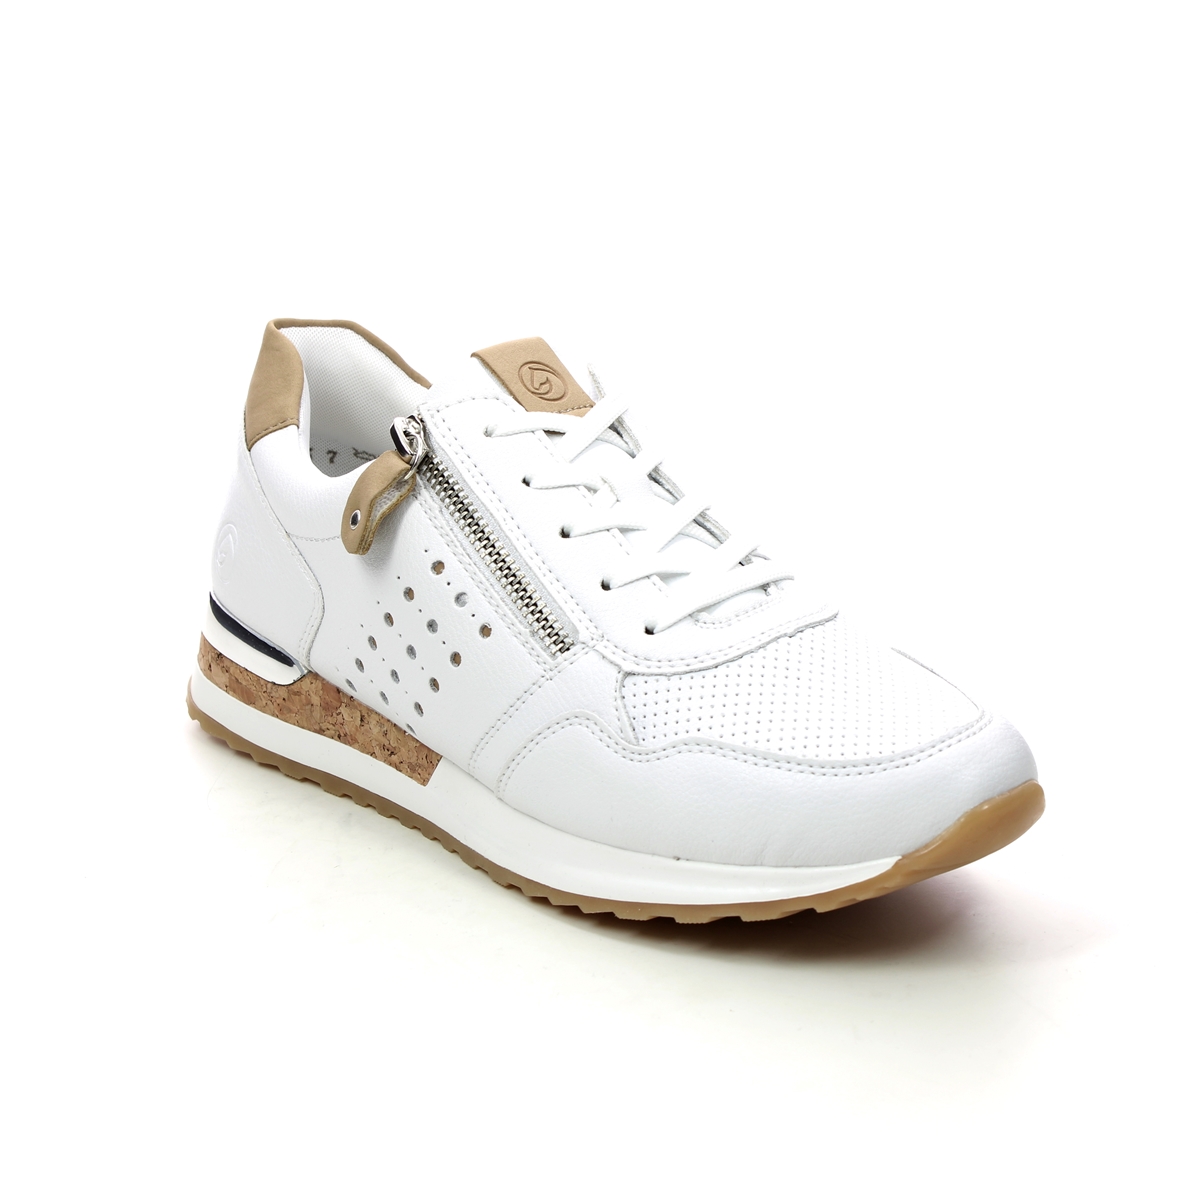 Remonte Vapocork White Leather Womens Trainers R2536-80 In Size 39 In Plain White Leather